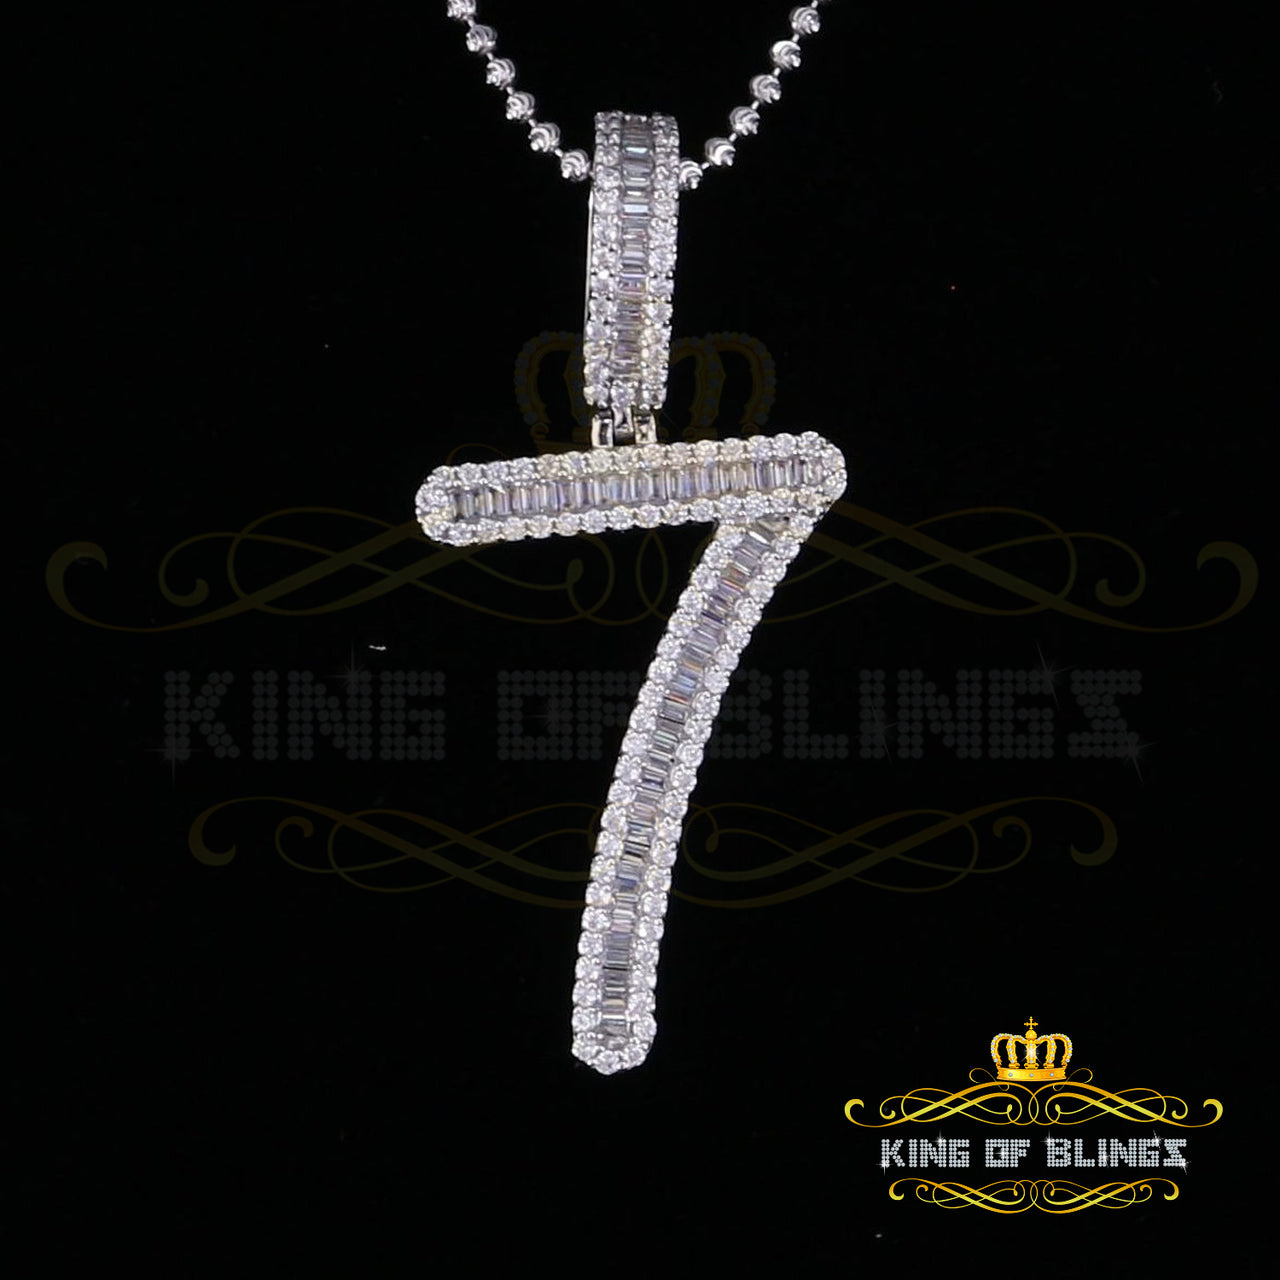 White Sterling Silver Numberic Number '7' Pendant 3.66ct Cubic Zirconia Stone KING OF BLINGS